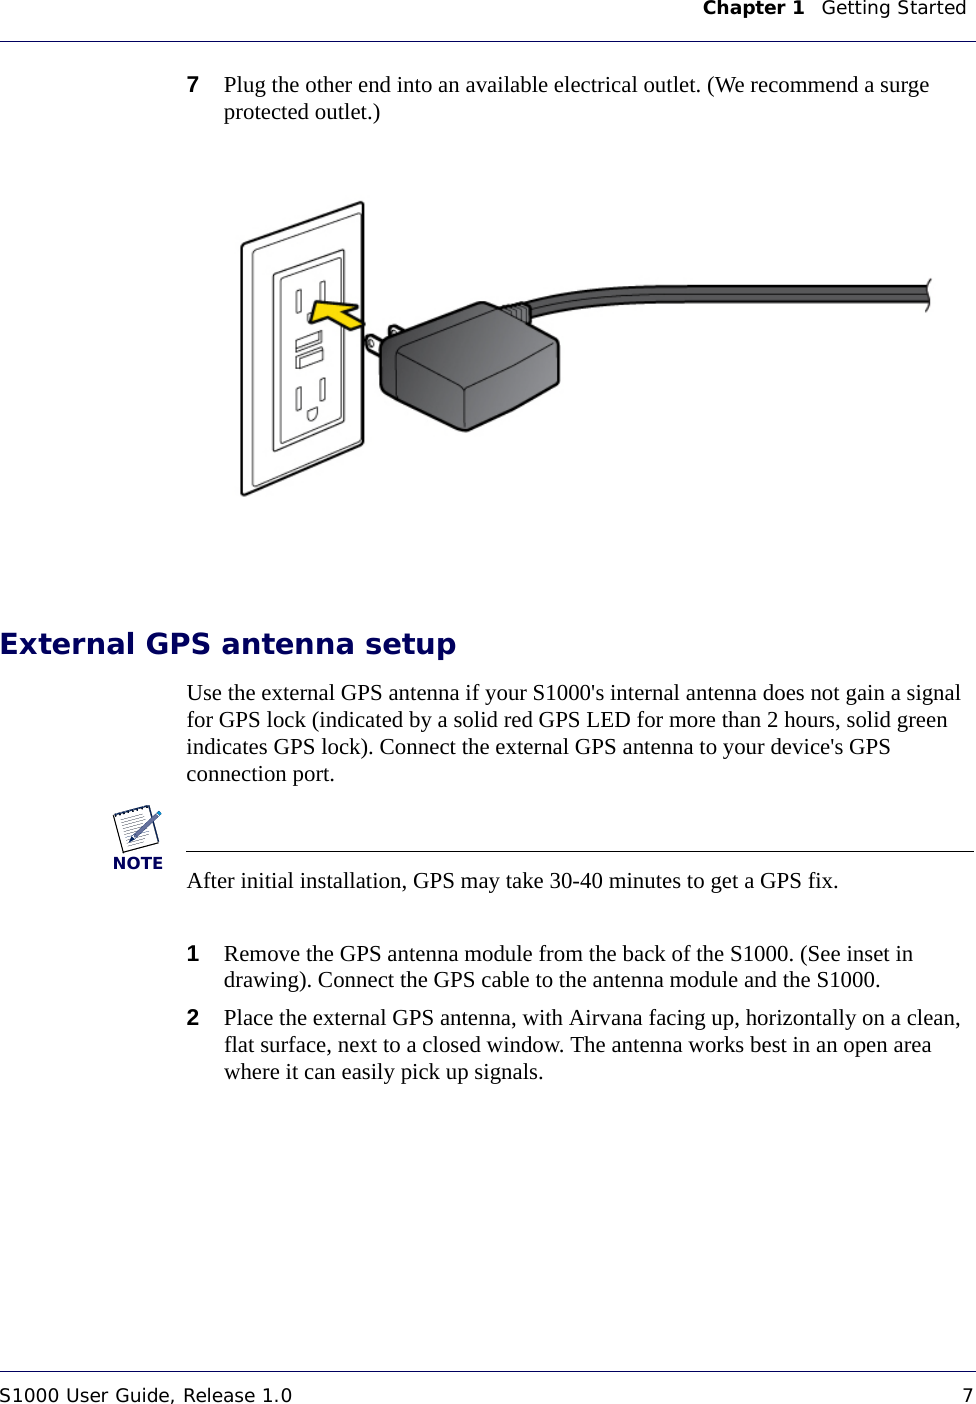 Chapter 1    Getting Started S1000 User Guide, Release 1.0 7DRAFT7Plug the other end into an available electrical outlet. (We recommend a surge protected outlet.)External GPS antenna setupUse the external GPS antenna if your S1000&apos;s internal antenna does not gain a signal for GPS lock (indicated by a solid red GPS LED for more than 2 hours, solid green indicates GPS lock). Connect the external GPS antenna to your device&apos;s GPS connection port.NOTEAfter initial installation, GPS may take 30-40 minutes to get a GPS fix.1Remove the GPS antenna module from the back of the S1000. (See inset in drawing). Connect the GPS cable to the antenna module and the S1000. 2Place the external GPS antenna, with Airvana facing up, horizontally on a clean, flat surface, next to a closed window. The antenna works best in an open area where it can easily pick up signals. 